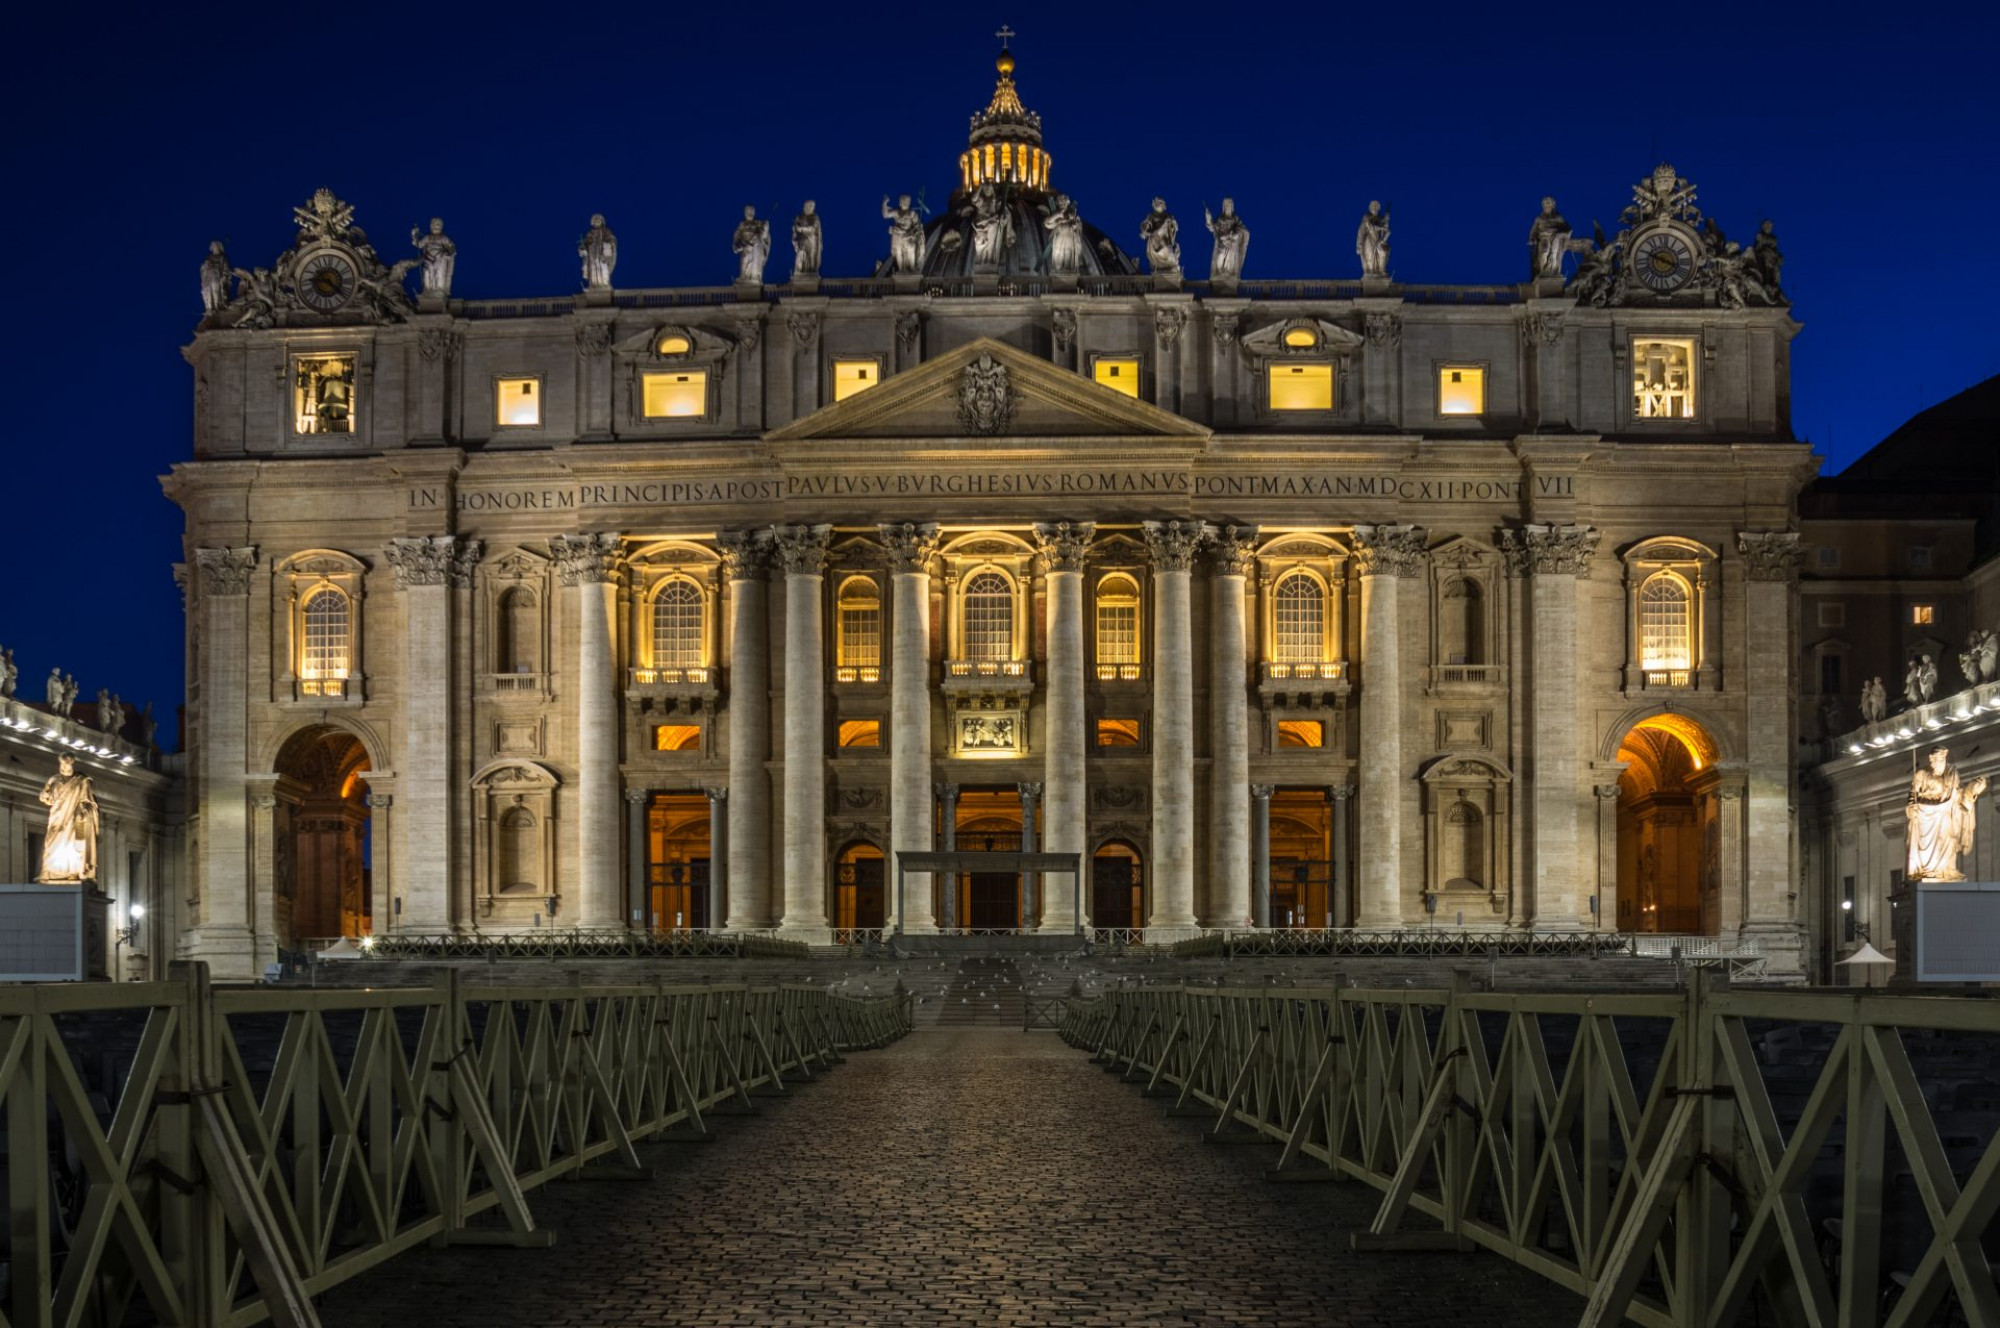 St Peter's Basilica, lit up at night